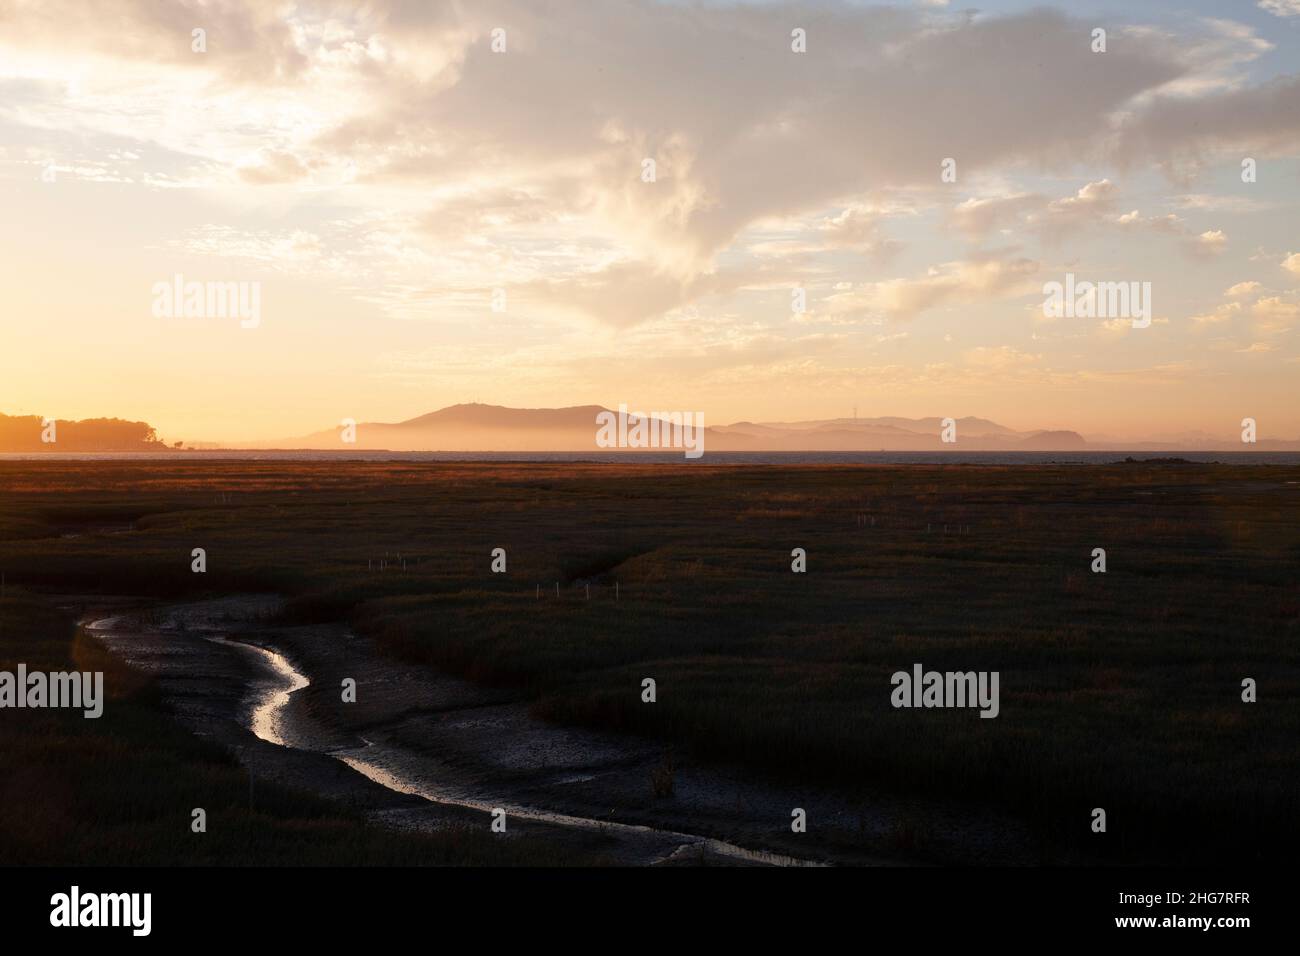 Wetlands' Waterway and Distant Mountain Range at Sunset, CA Stock Photo